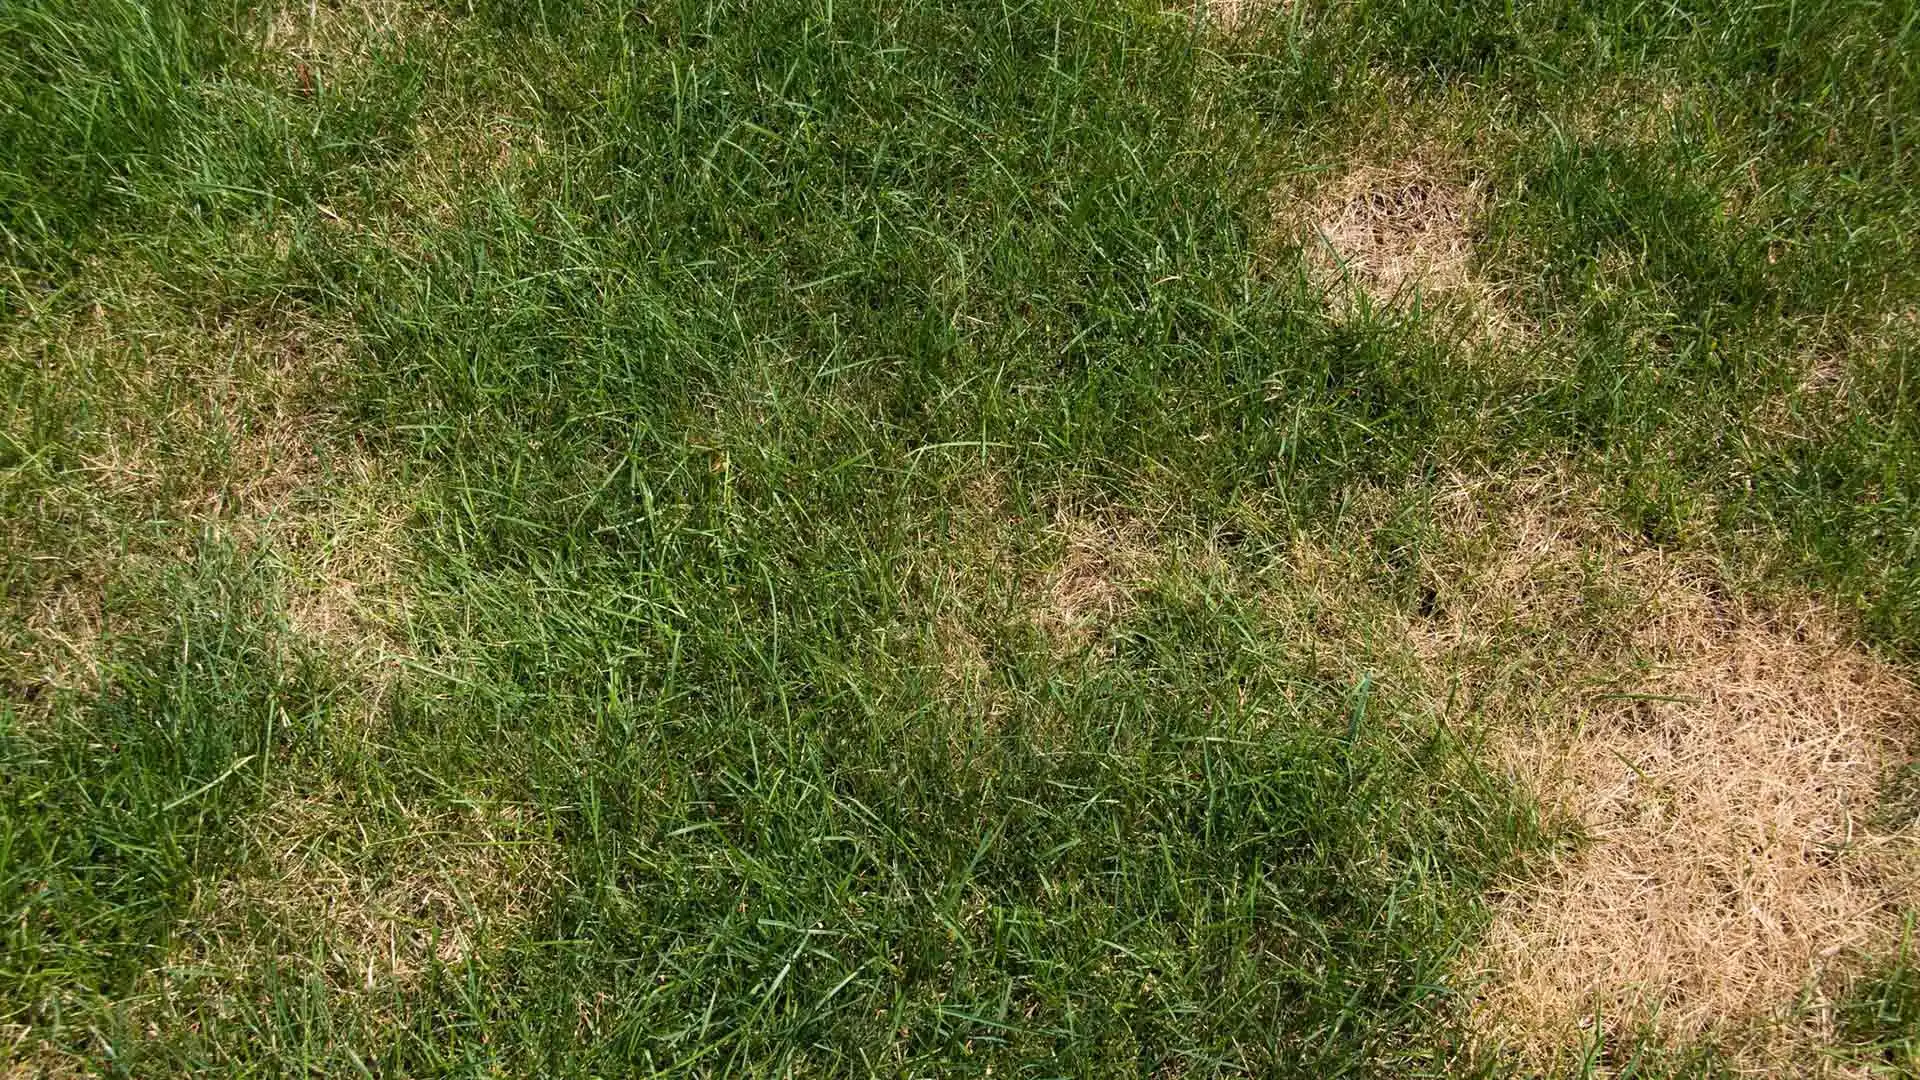 Brown spot lawn disease on a lawn needing to be cured in Clifton, CO.